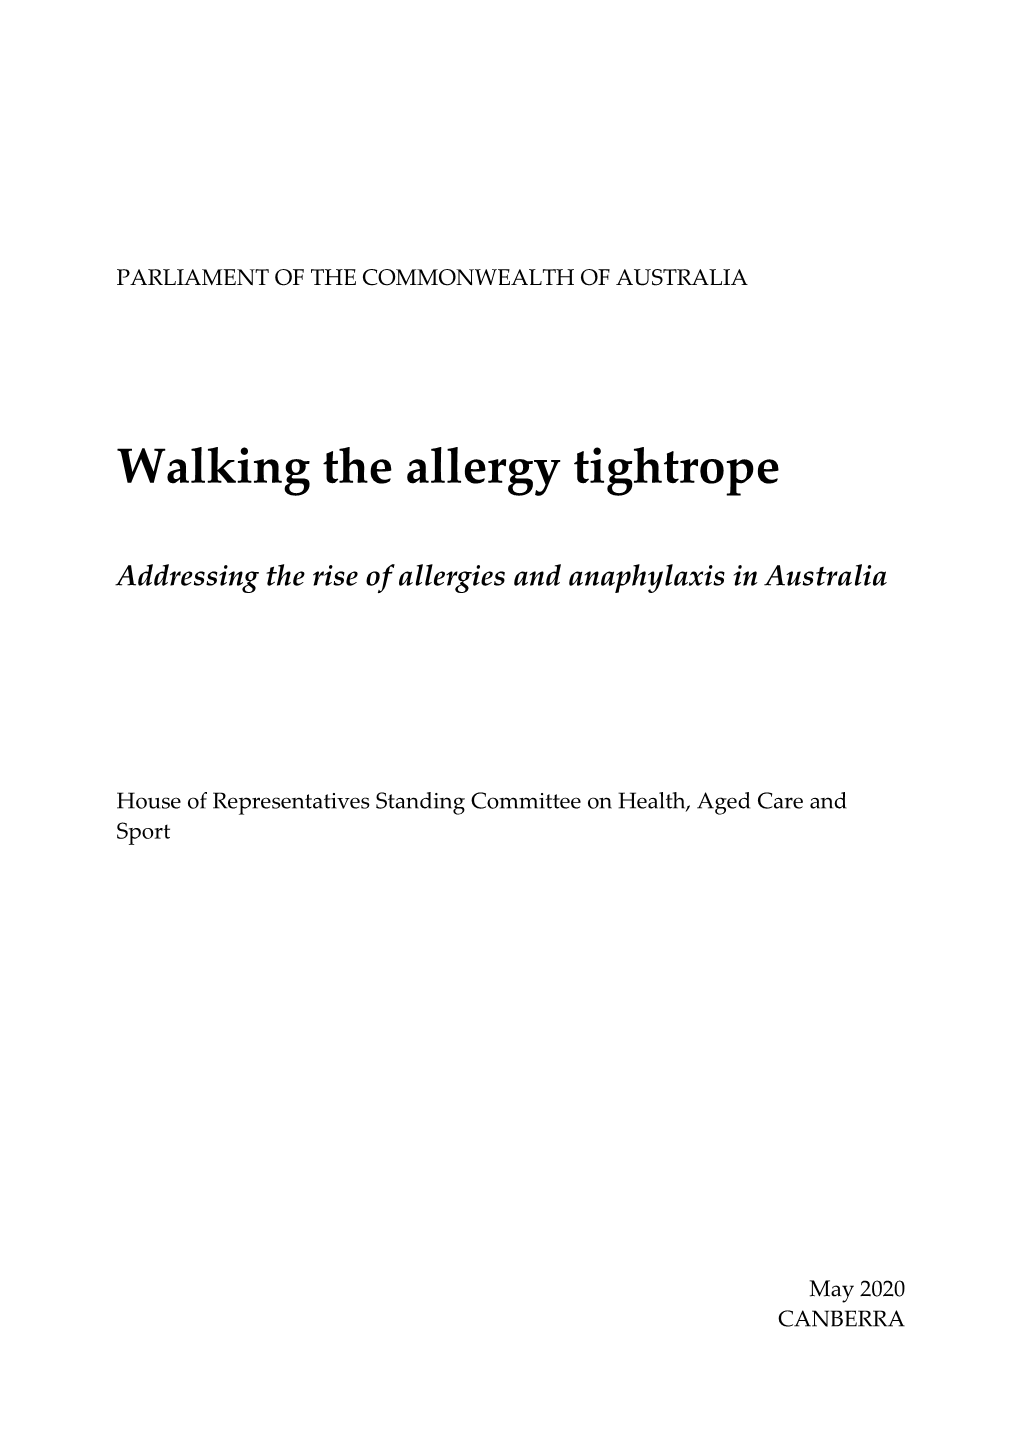 Walking the Allergy Tightrope